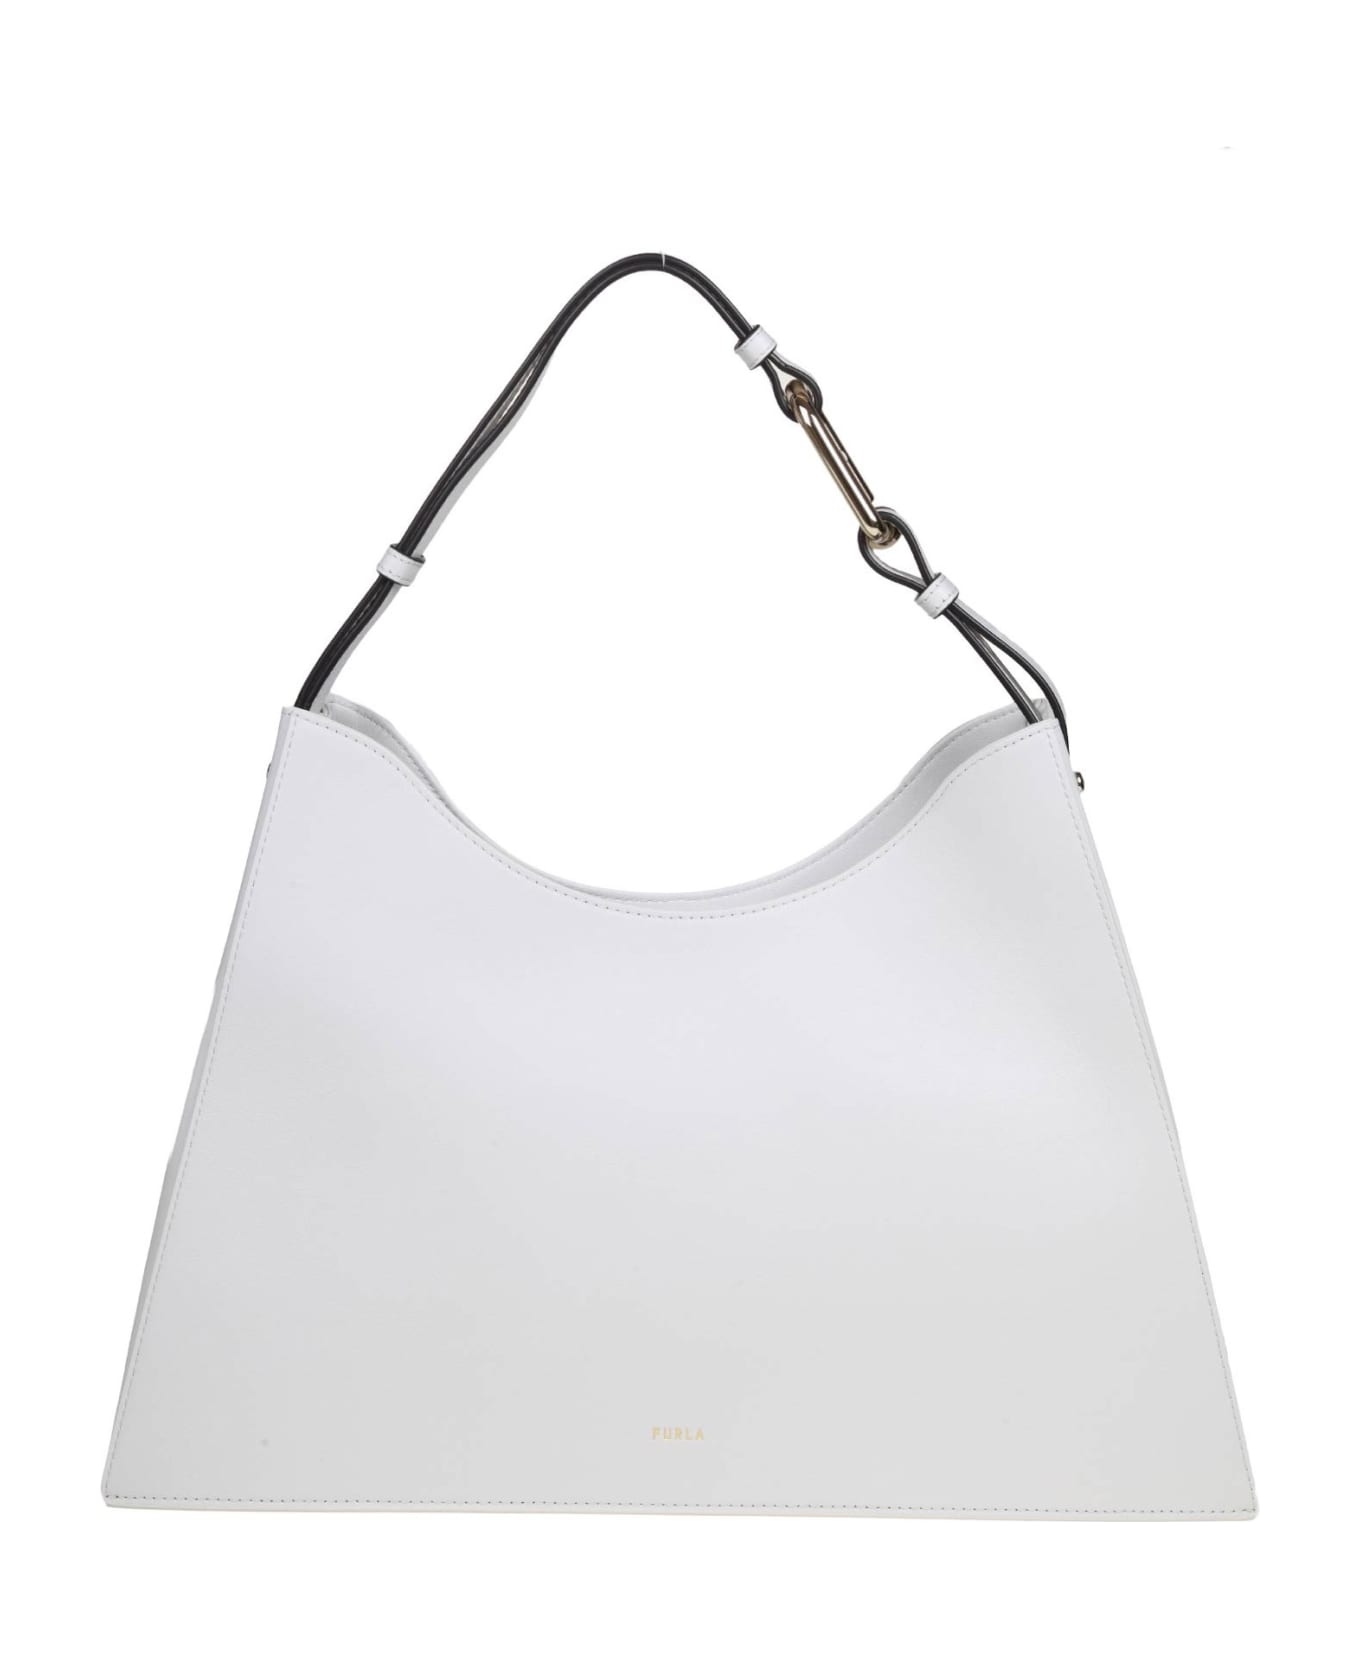 Furla Nuvola Shoulder Bag In Marshmallow Color Leather - Marshmallow